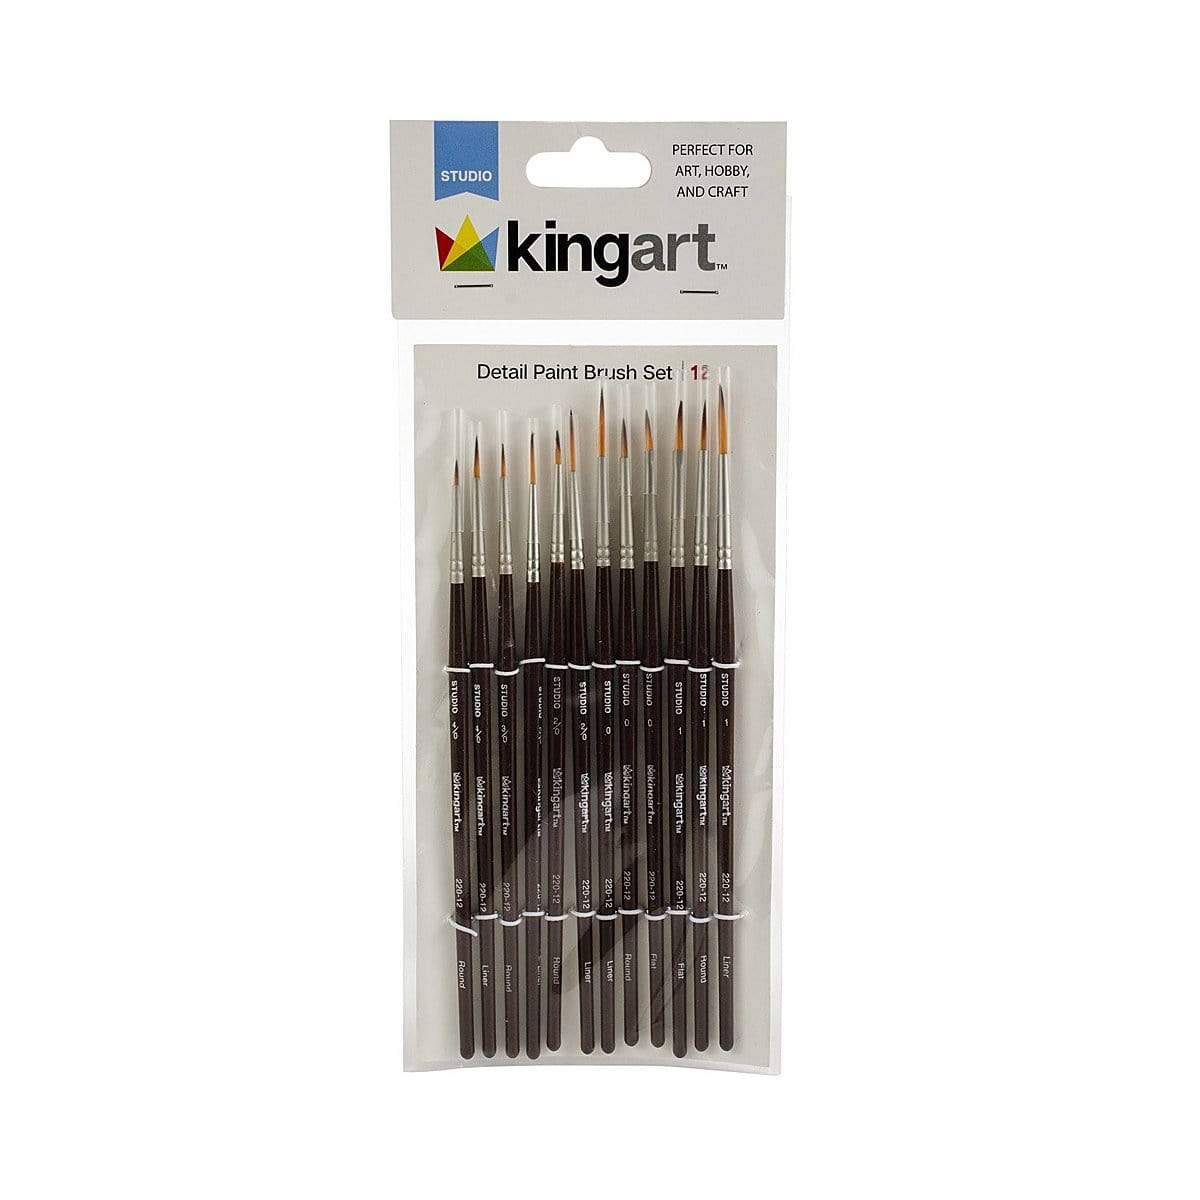 Versatil Travel Brushes by Escoda - High quality artists paint, watercolor,  speciality brushes